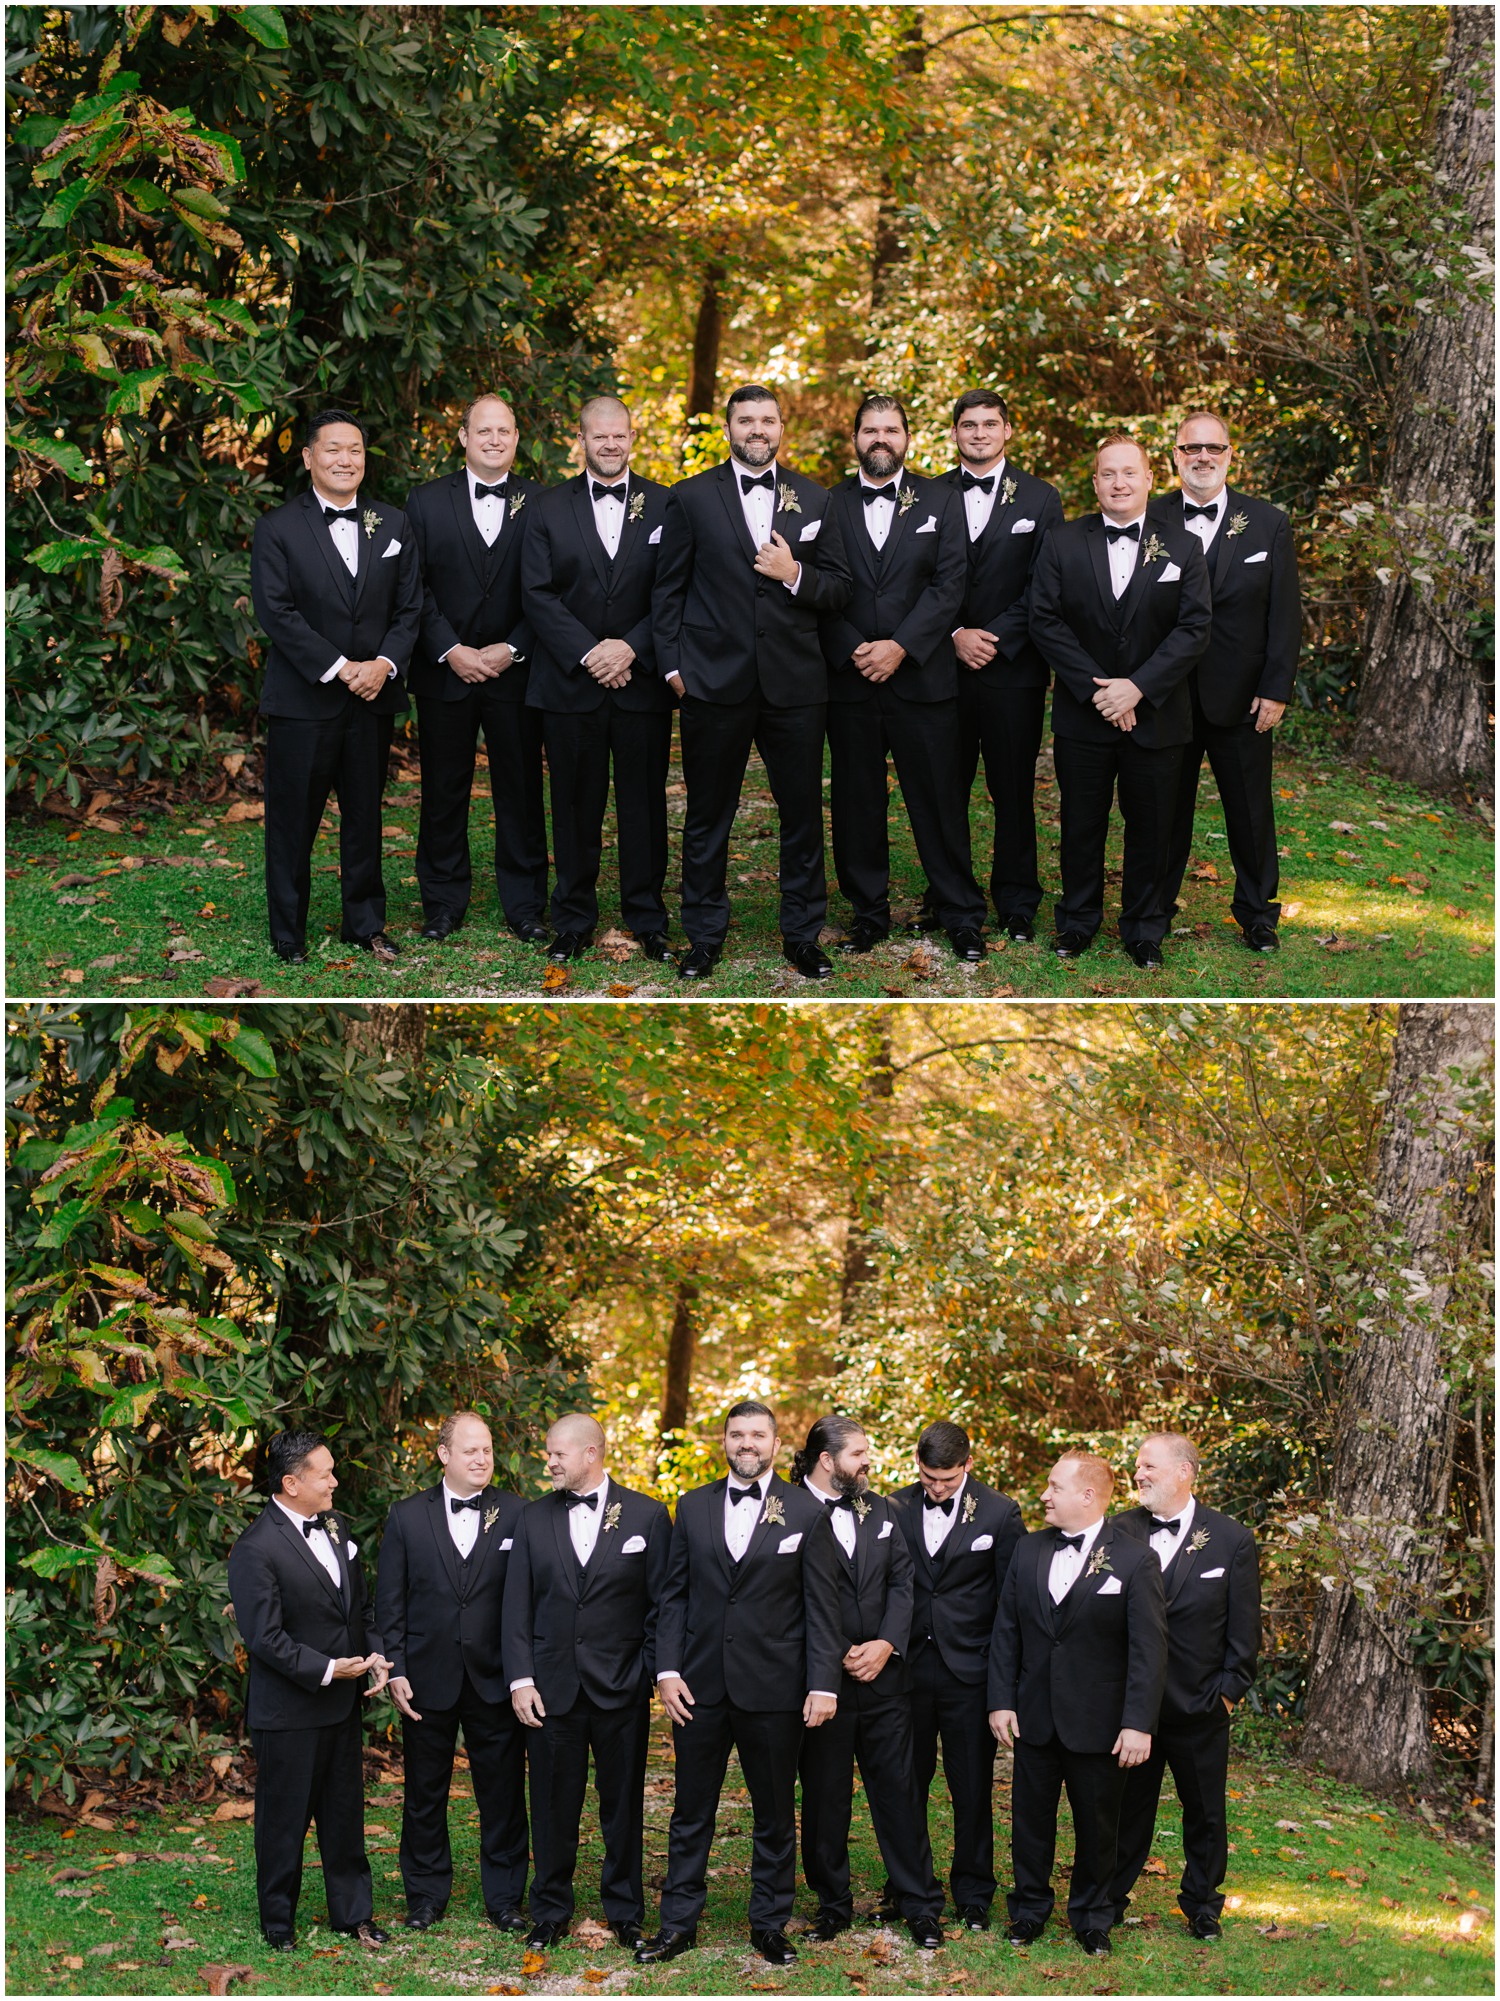 groom poses with 7 groomsmen in classic tuxes